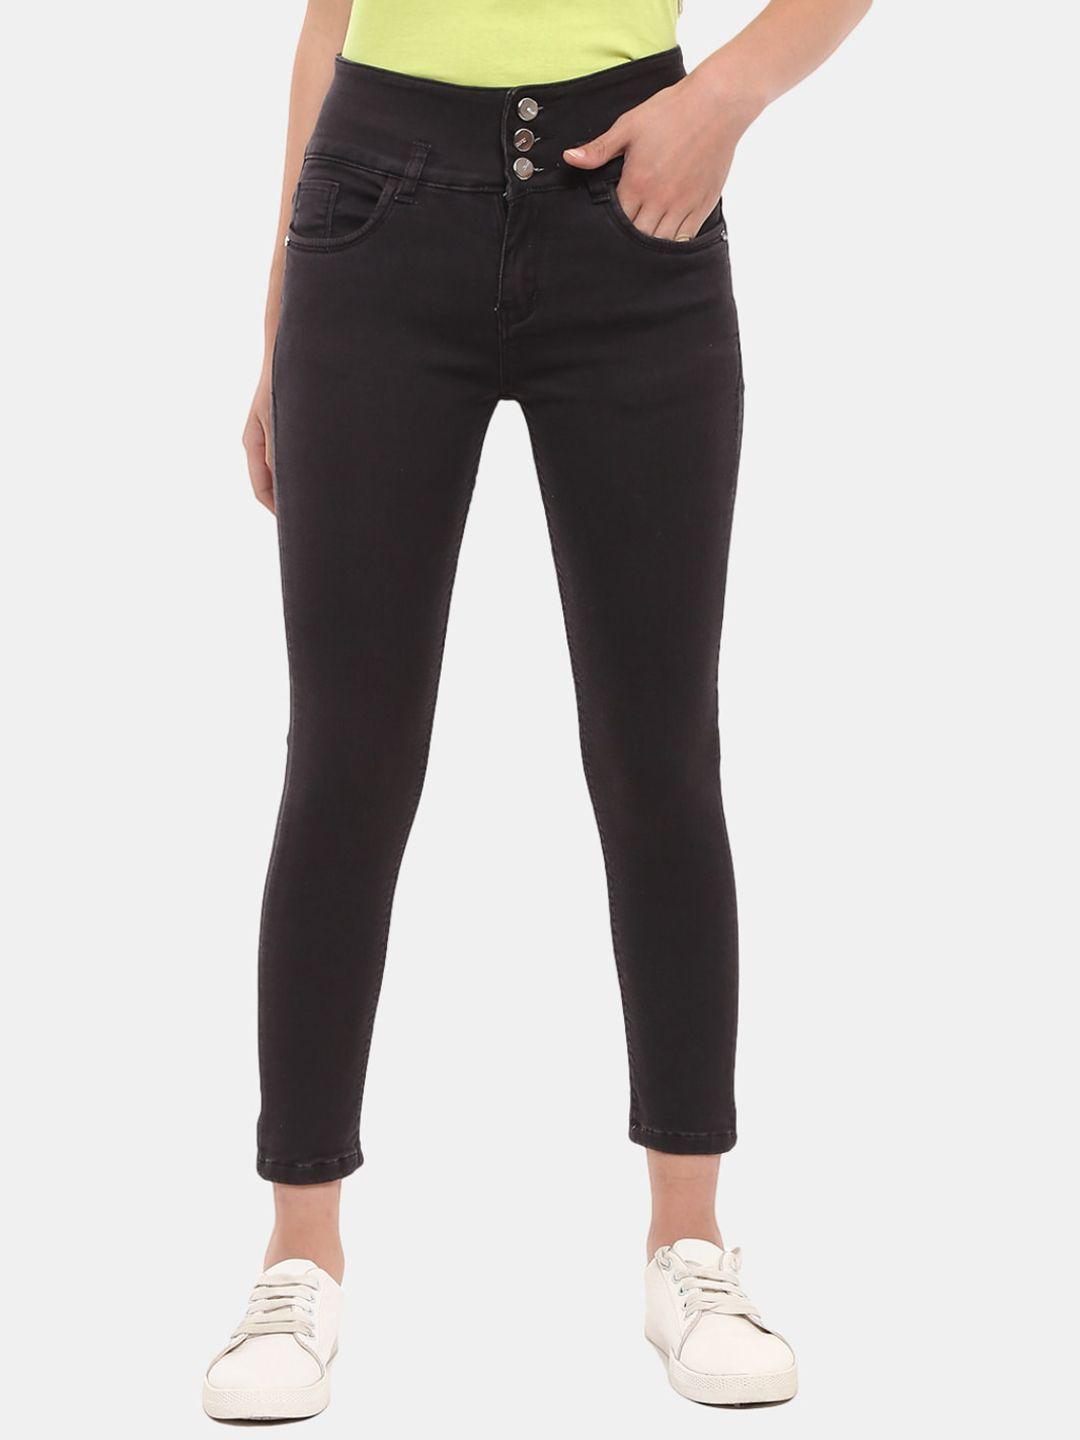 v-mart women brown solid cotton cropped trousers